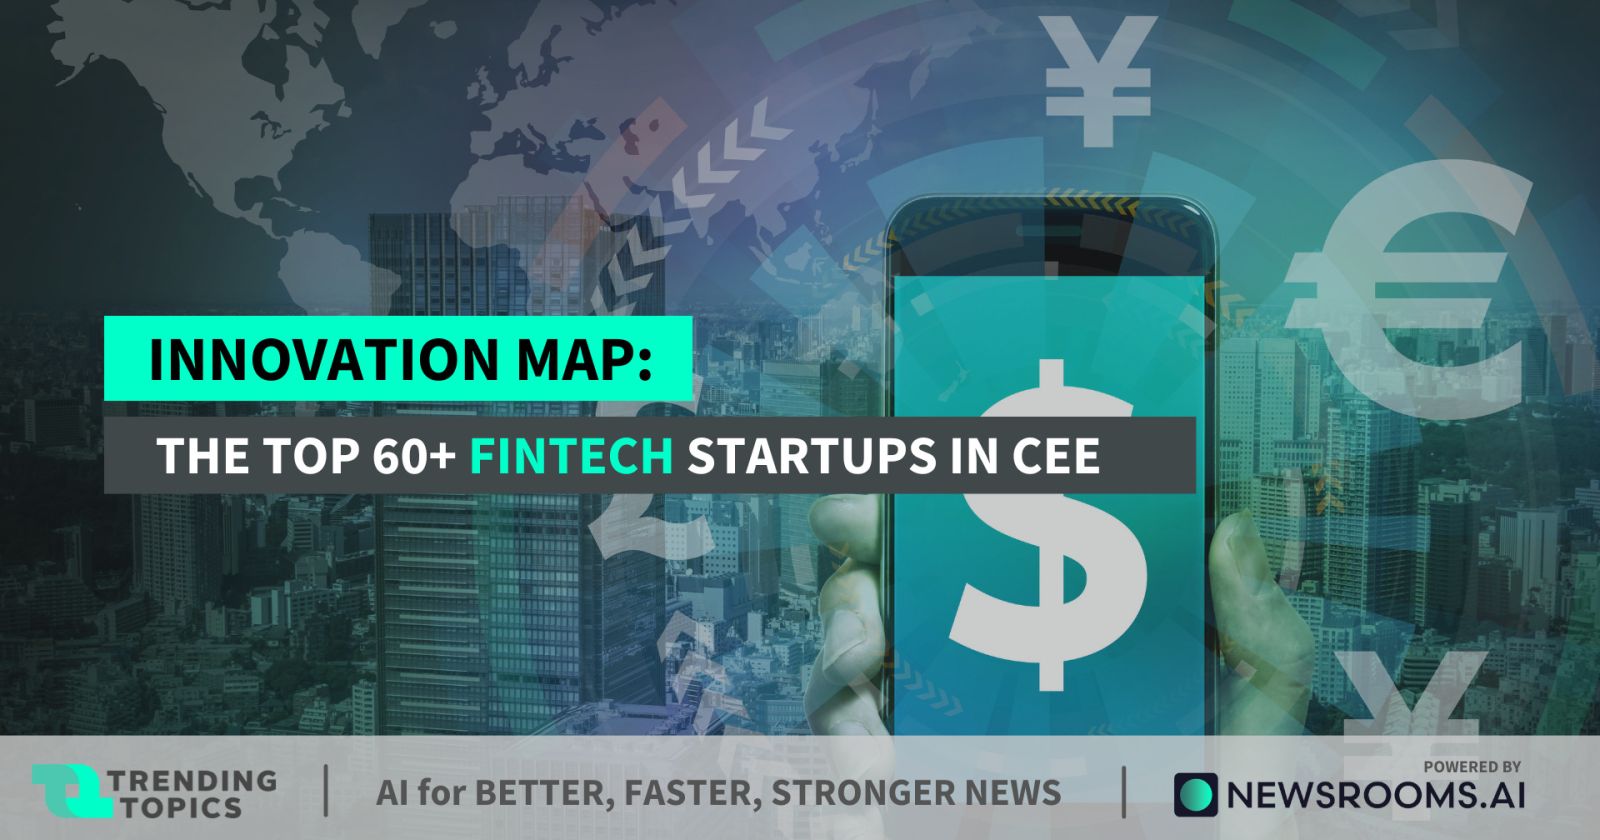 Innovation Map: The top 60+ FinTech startups in CEE